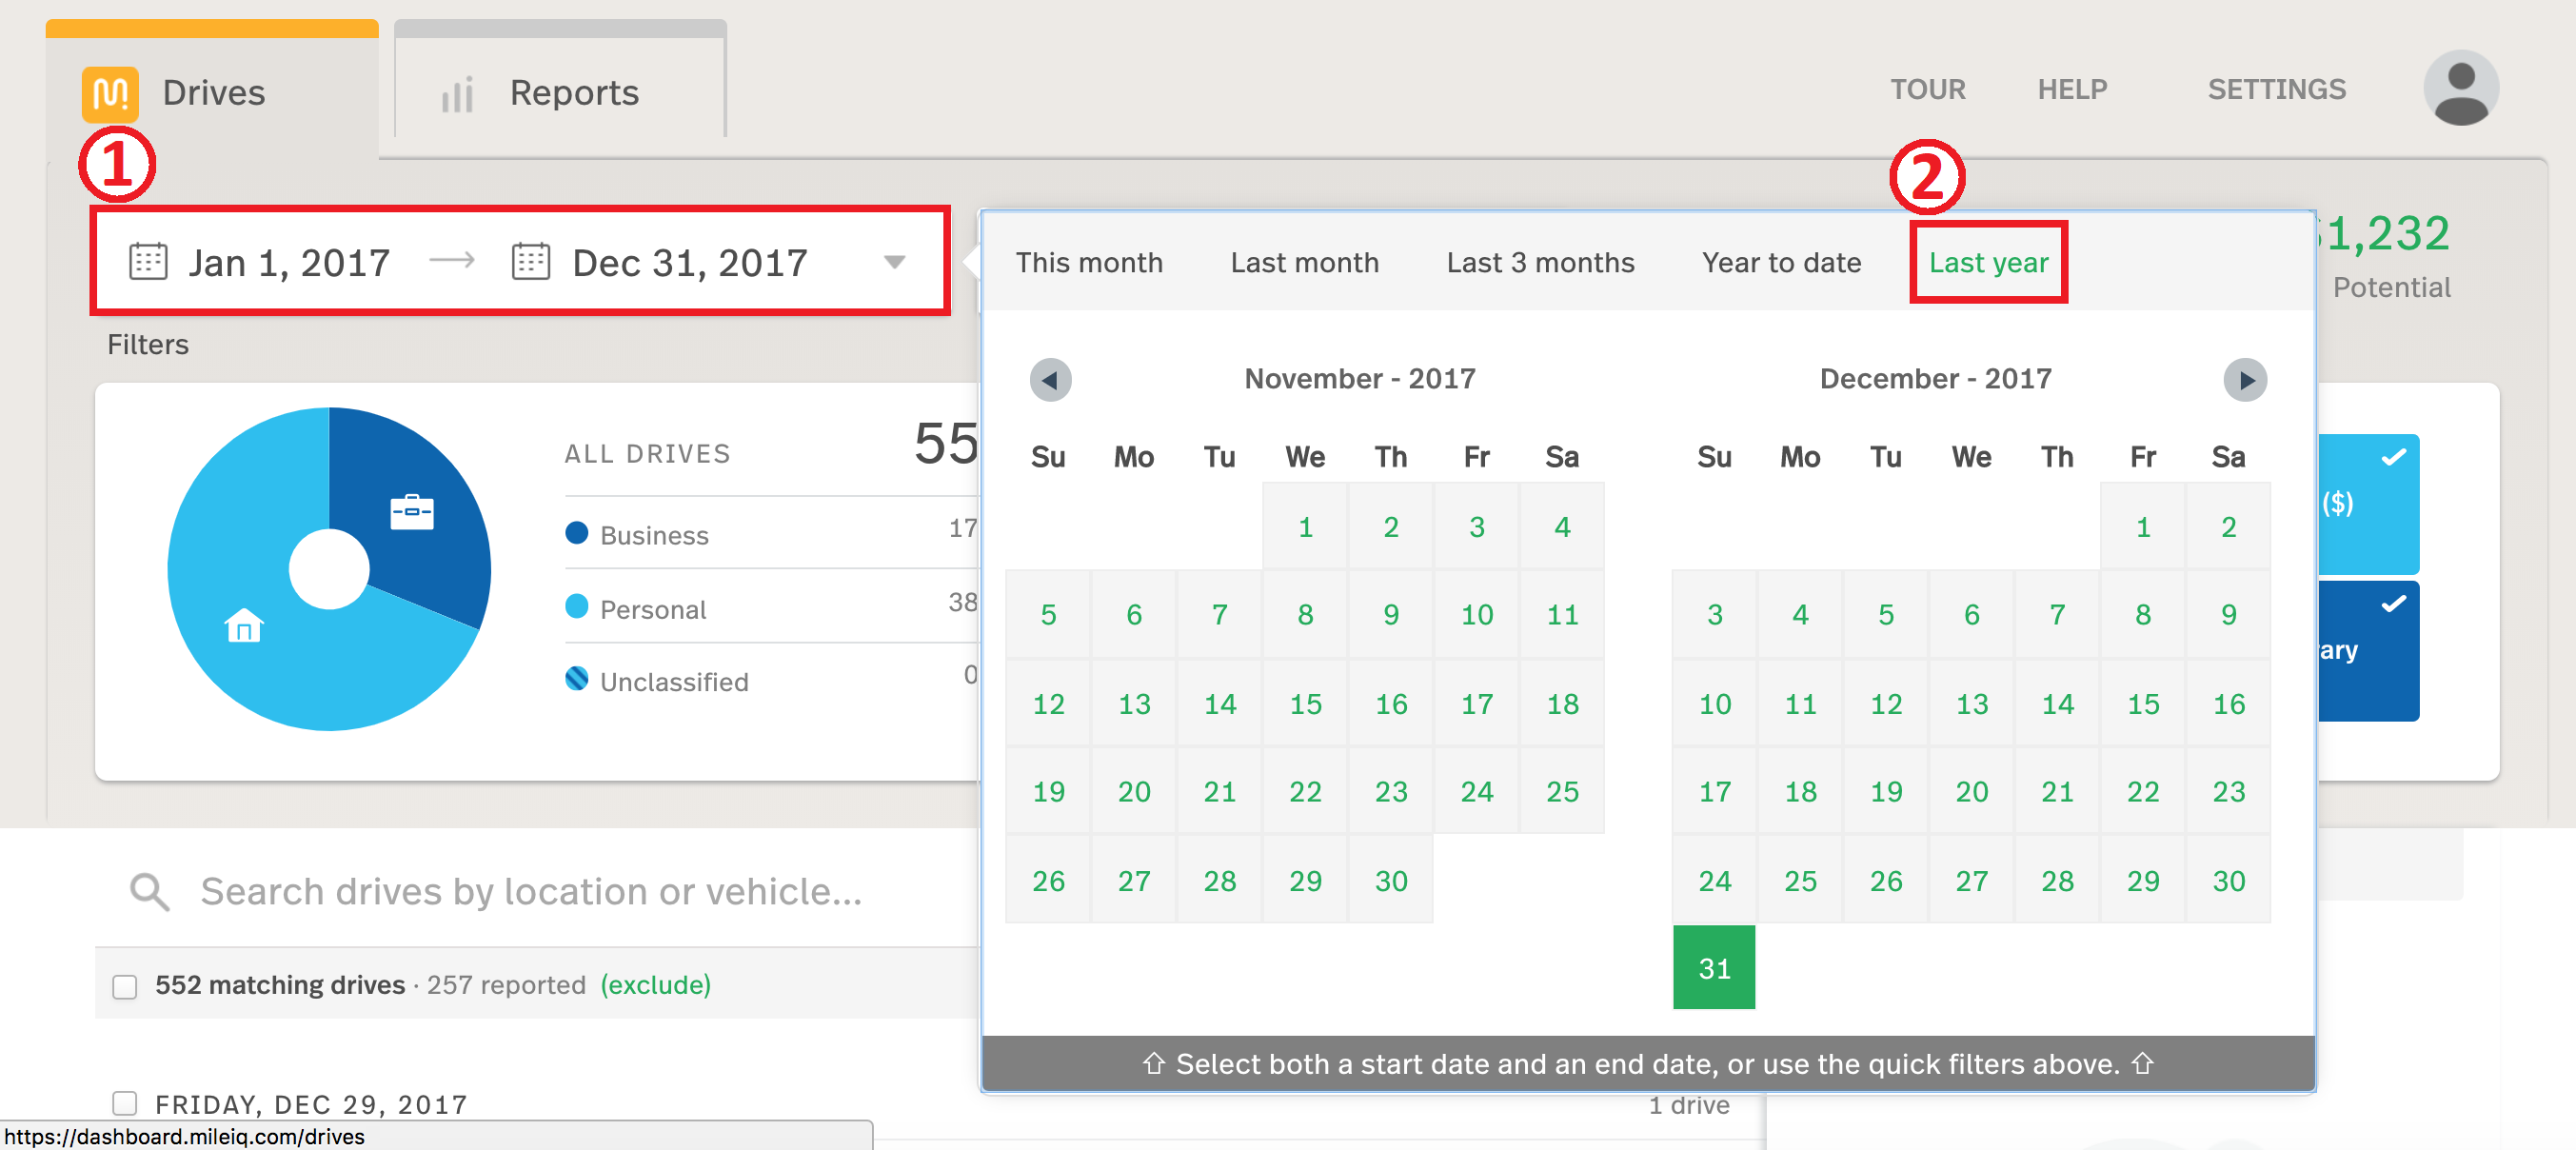 image of dashboard with date picker highlighted and enabled to show the “Last year” option selected